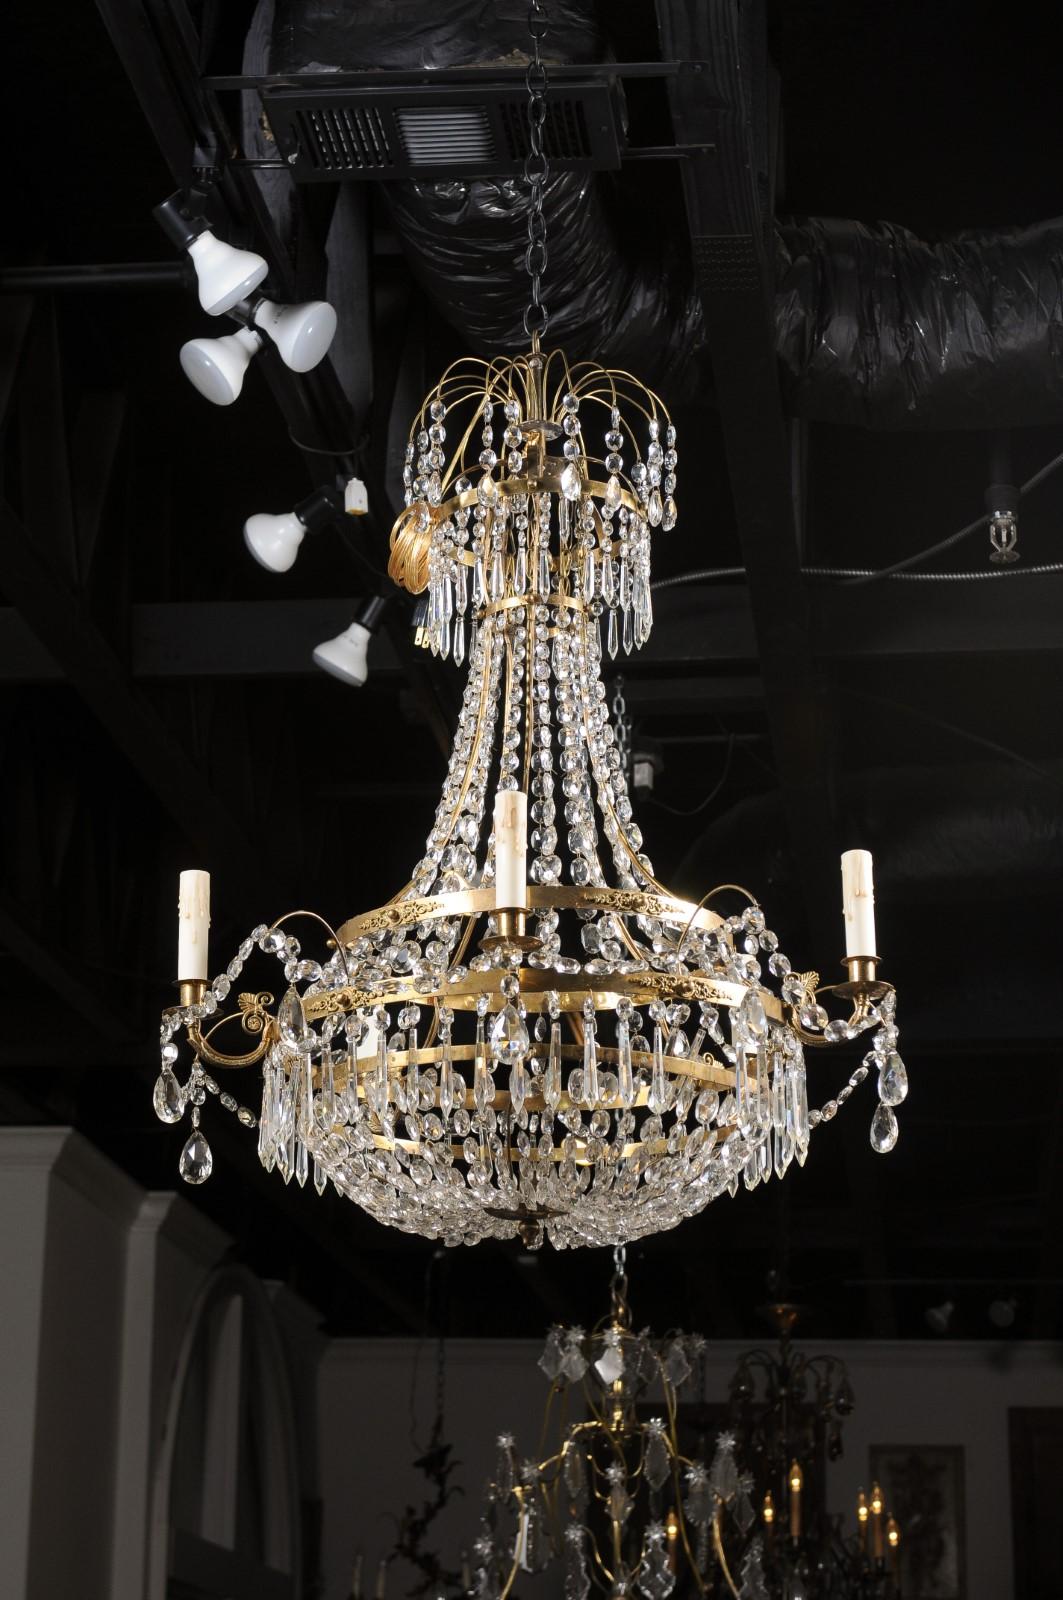 A Swedish Gustavian period five-light crystal chandelier from the early 19th century, with brass armature, spear crystals and floral motifs. Created in Sweden during the first decade of the 19th century, this Gustavian crystal basket chandelier